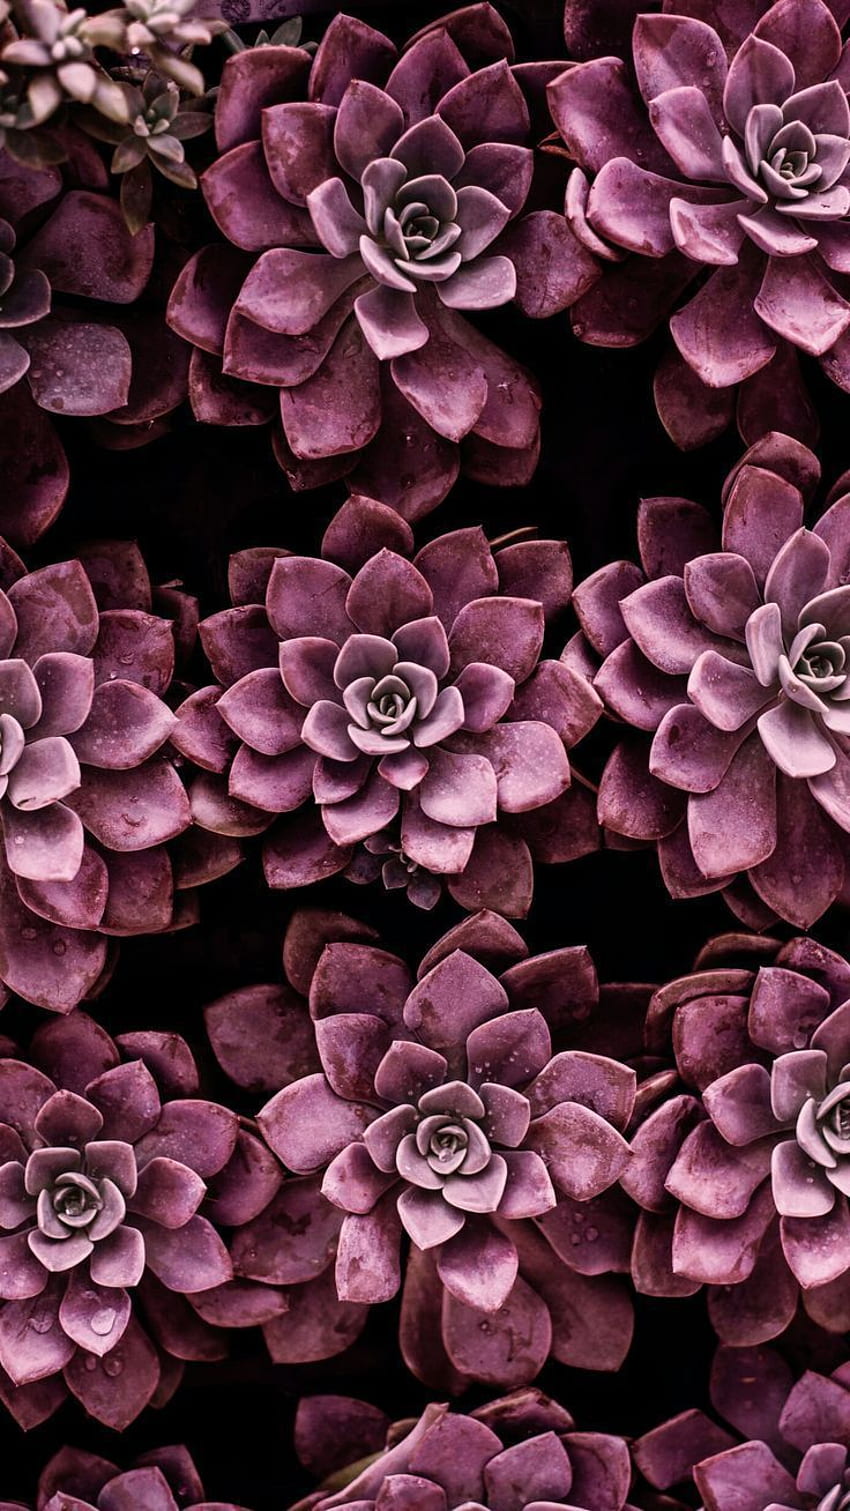 shades of violet. Succulent Love in 2019., Rose Shades HD phone wallpaper